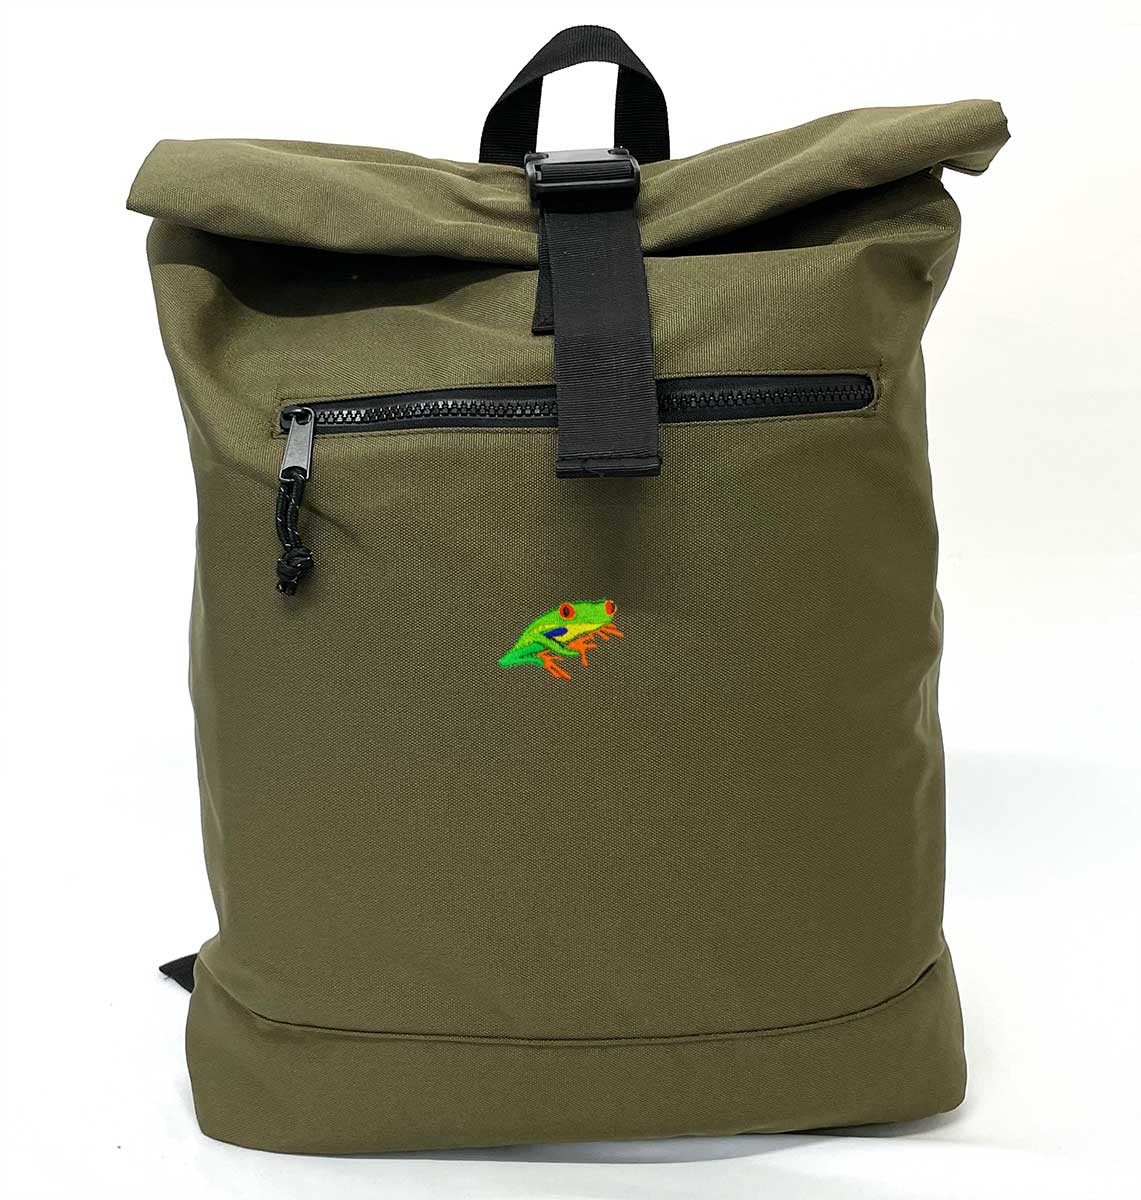 Red-Eyed Tree Frog Beach Roll-top Recycled Backpack - Blue Panda